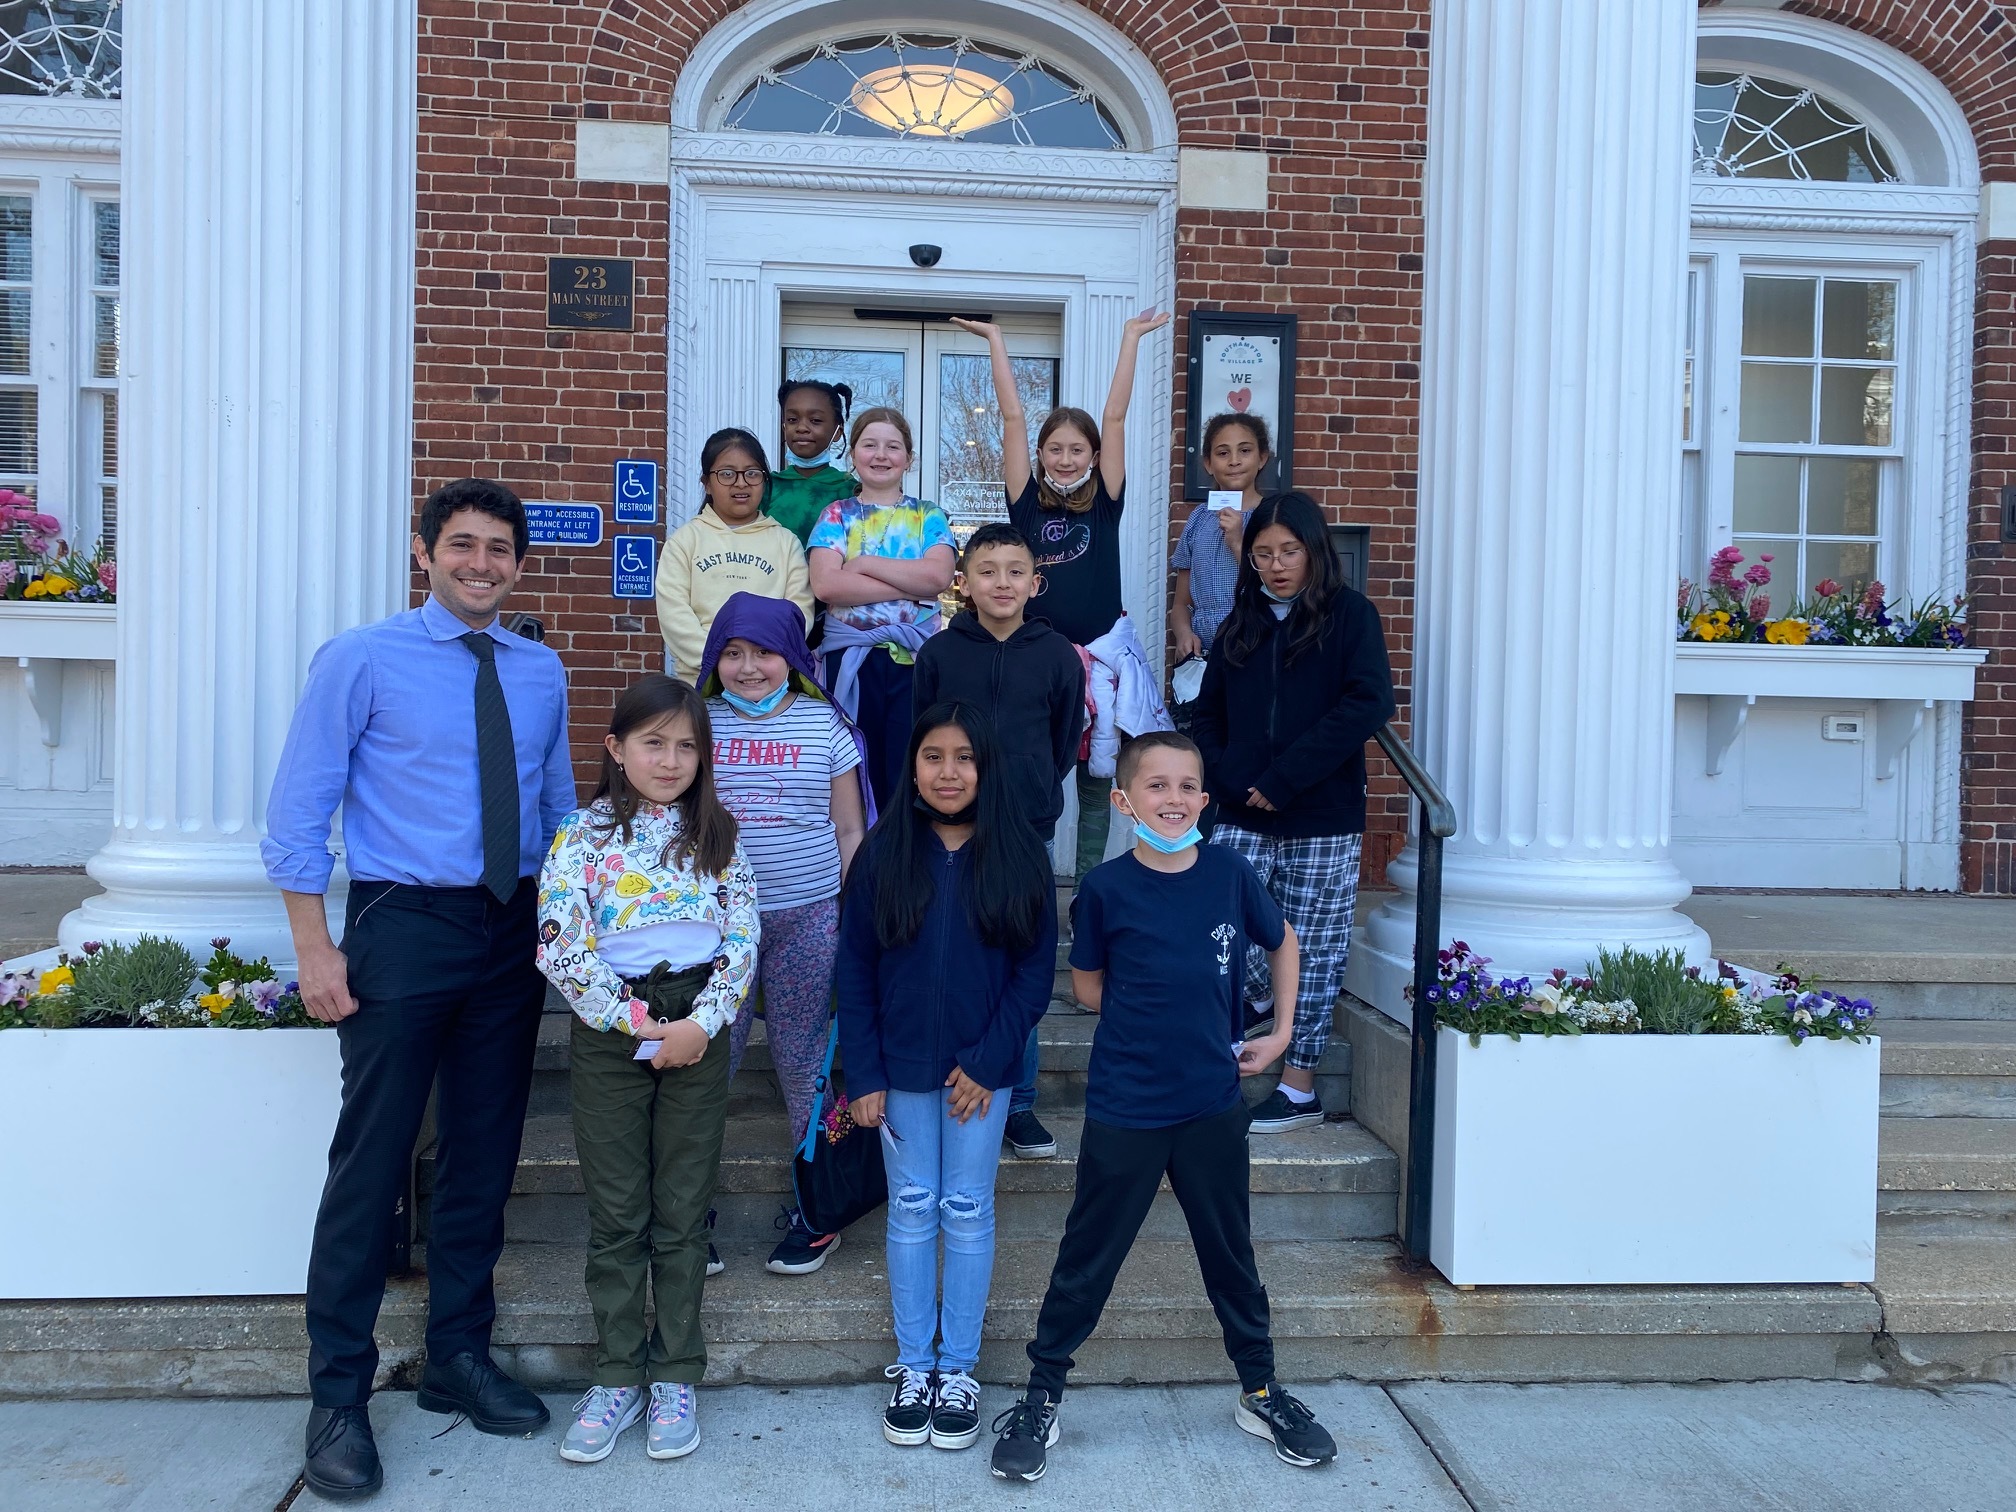 Members of the Southampton Elementary School Student Council and the cLub's advisers, Annemarie Calogrias and Lisa Carew, recently visited Southampton Village Hall, where Southampton Village Mayor Jesse Warren facilitated a tour of the various departments and the building. The students learned firsthand about different government jobs from employees who met and spoke with them. They also participated in a question-and-answer session with the mayor, who was impressed with their thoughtful and inquisitive questions. COURTESY SOUTHAMPTON SCHOOL DISTRICT